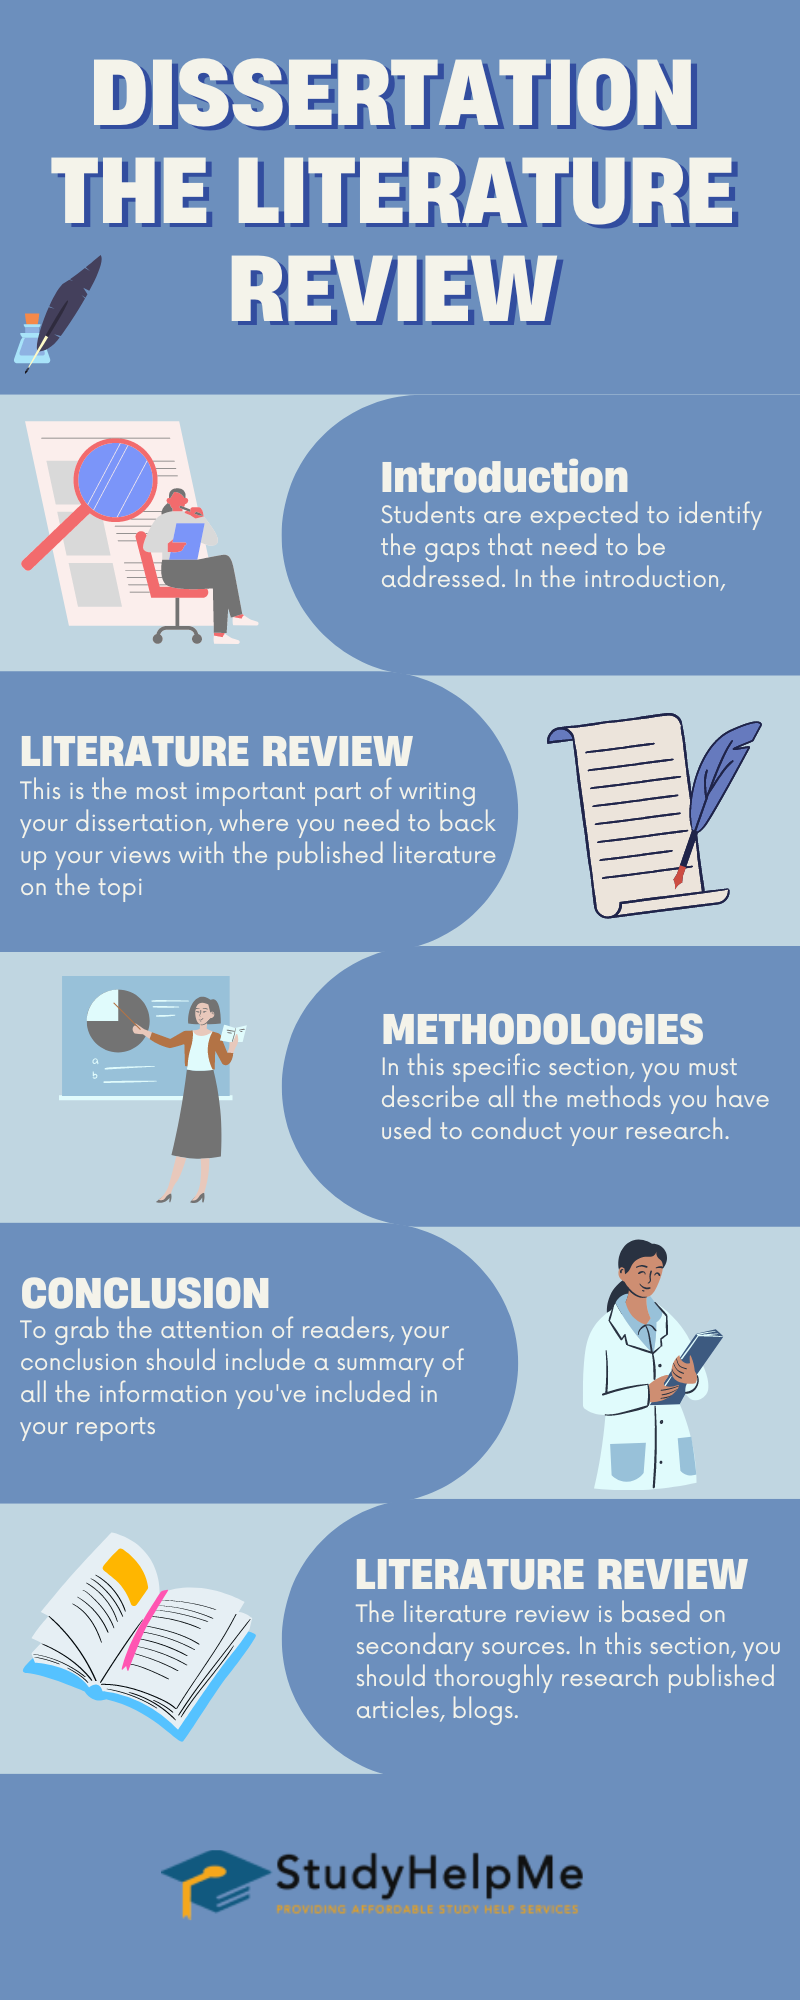 how long should dissertation literature review be